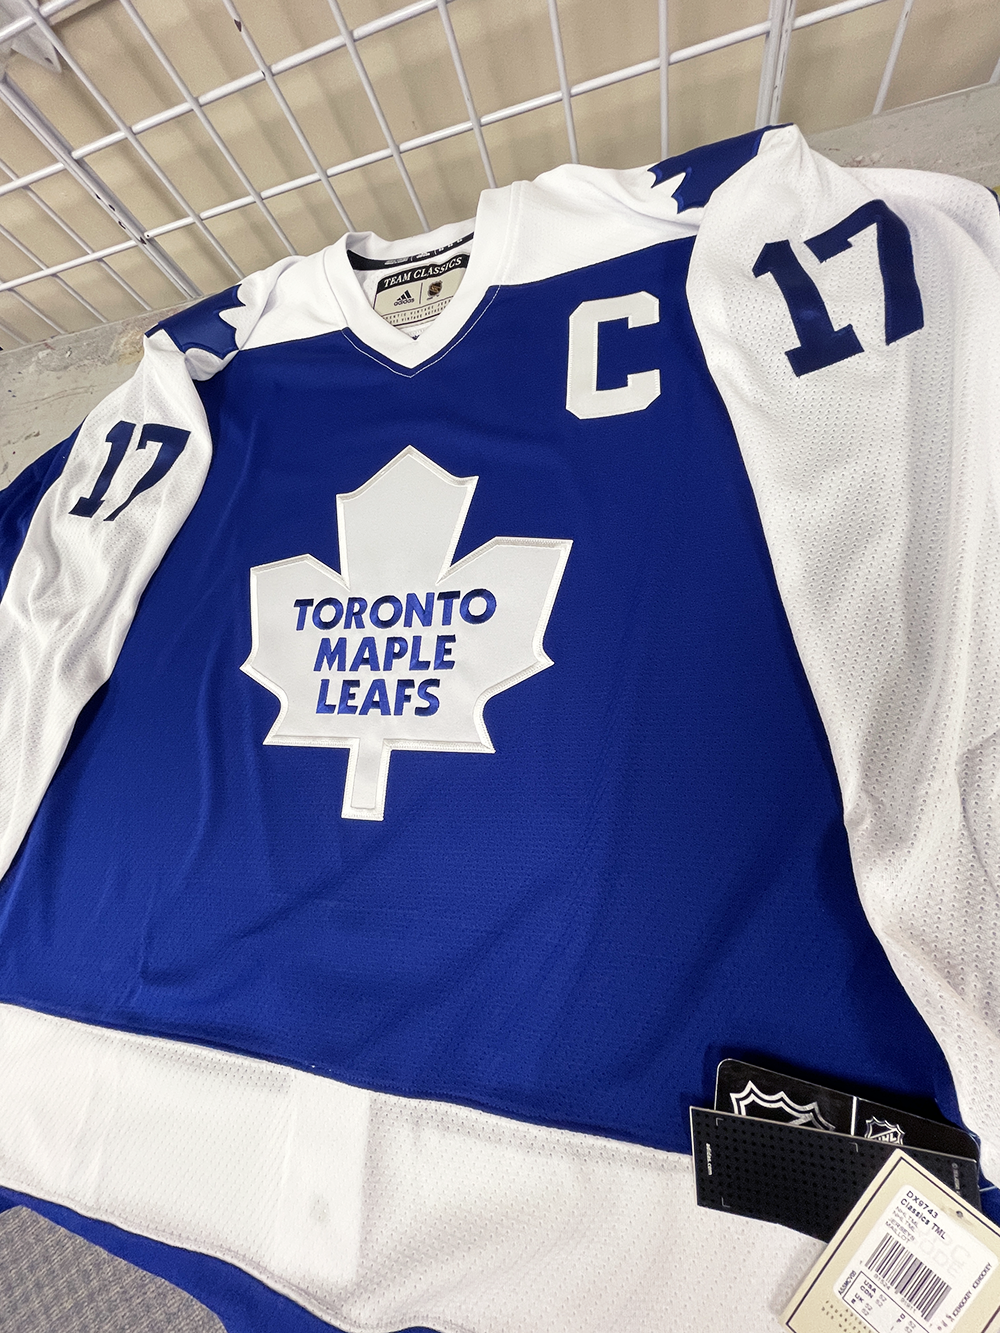 Comparing a CCM Vintage and an Adidas Team Classic Jersey 